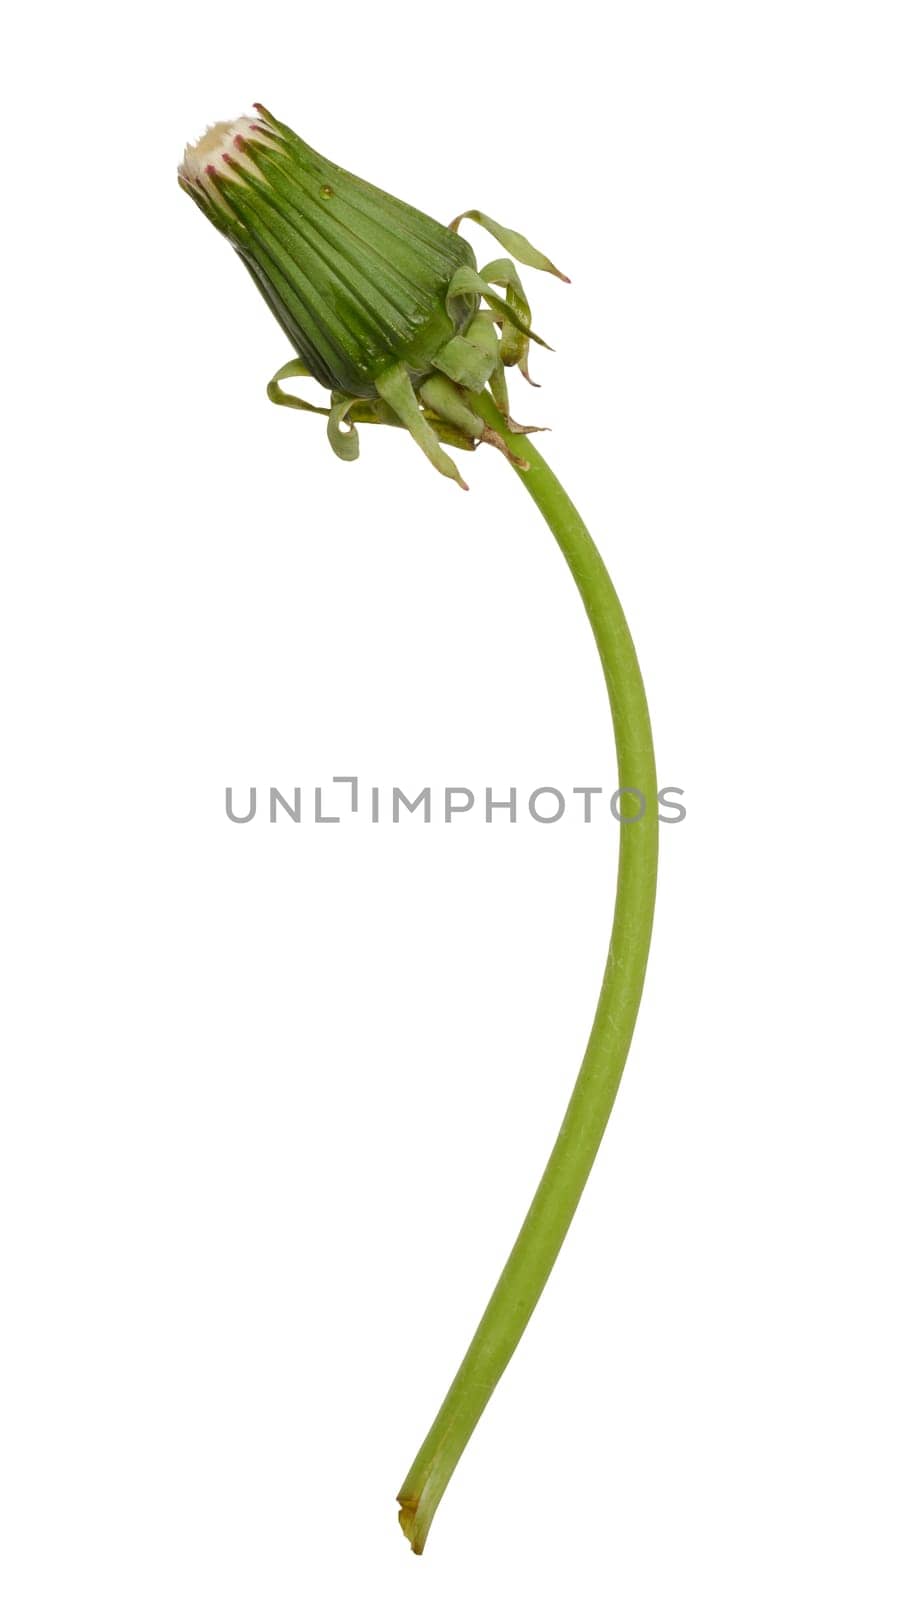 Dandelion on a long green stem, isolated background, close up